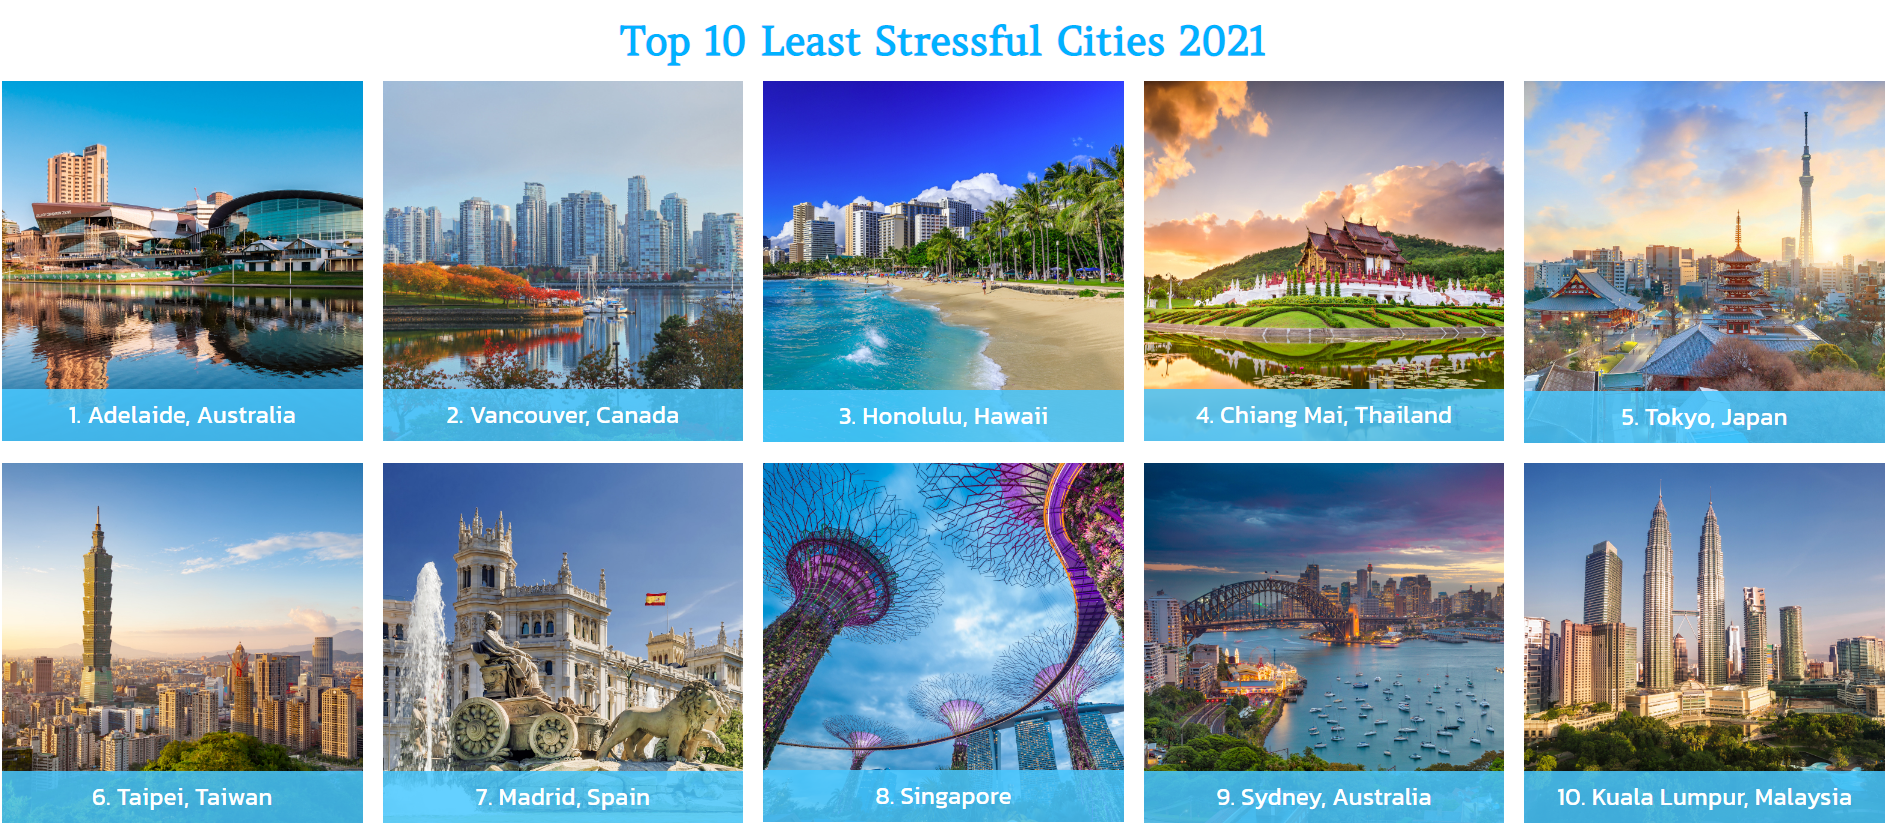 Kl #10 on the least stressful cities for tourists list, ranks 2nd for friendliness